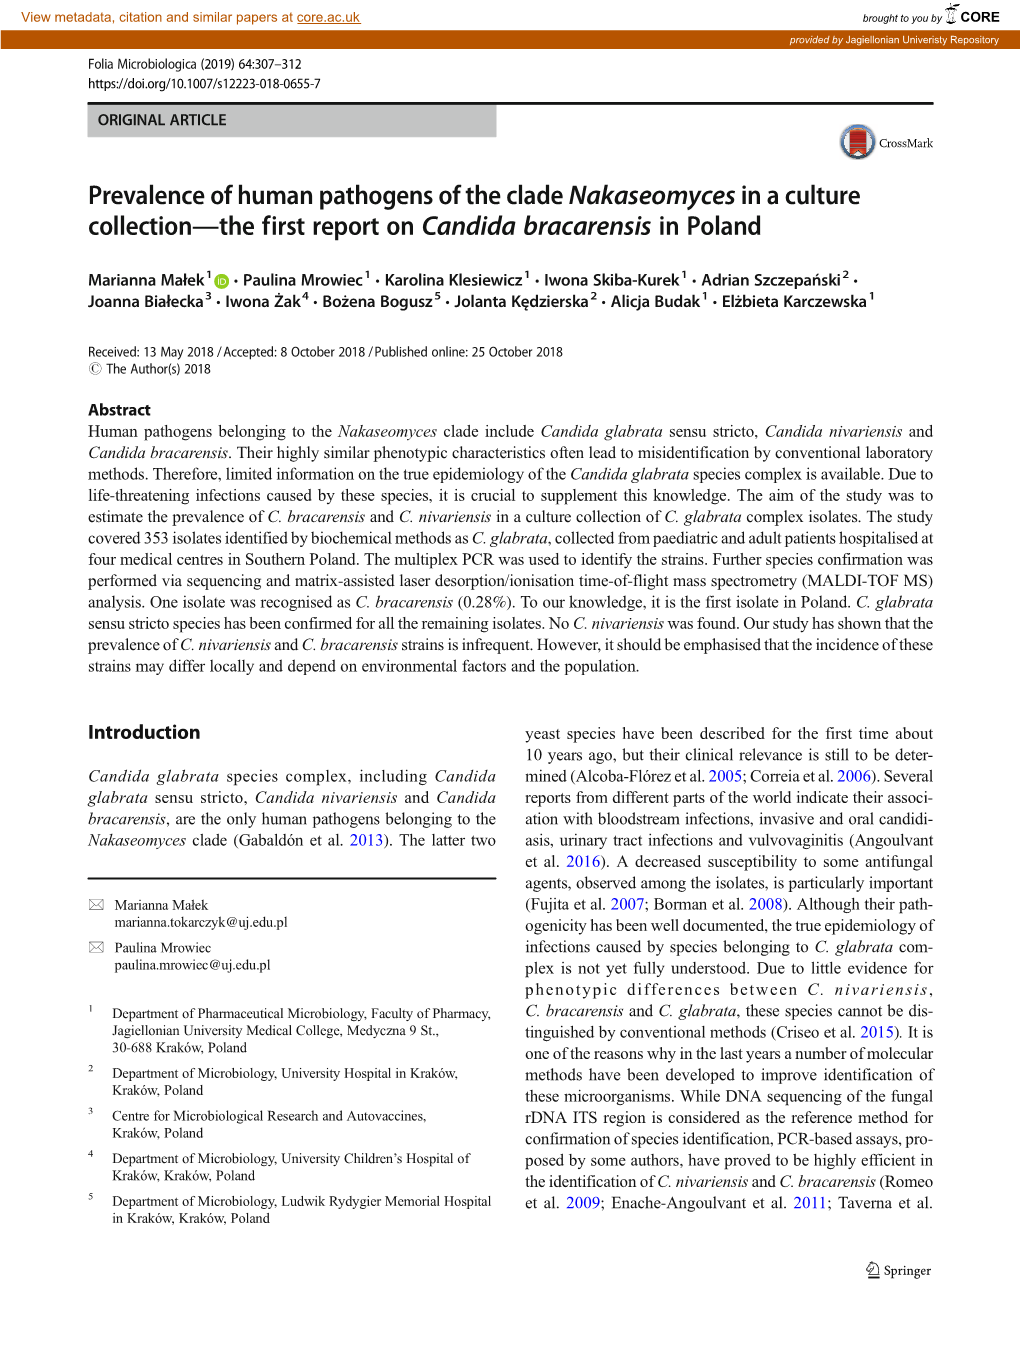 Prevalence of Human Pathogens of the Clade Nakaseomyces in a Culture Collection—The First Report on Candida Bracarensis in Poland